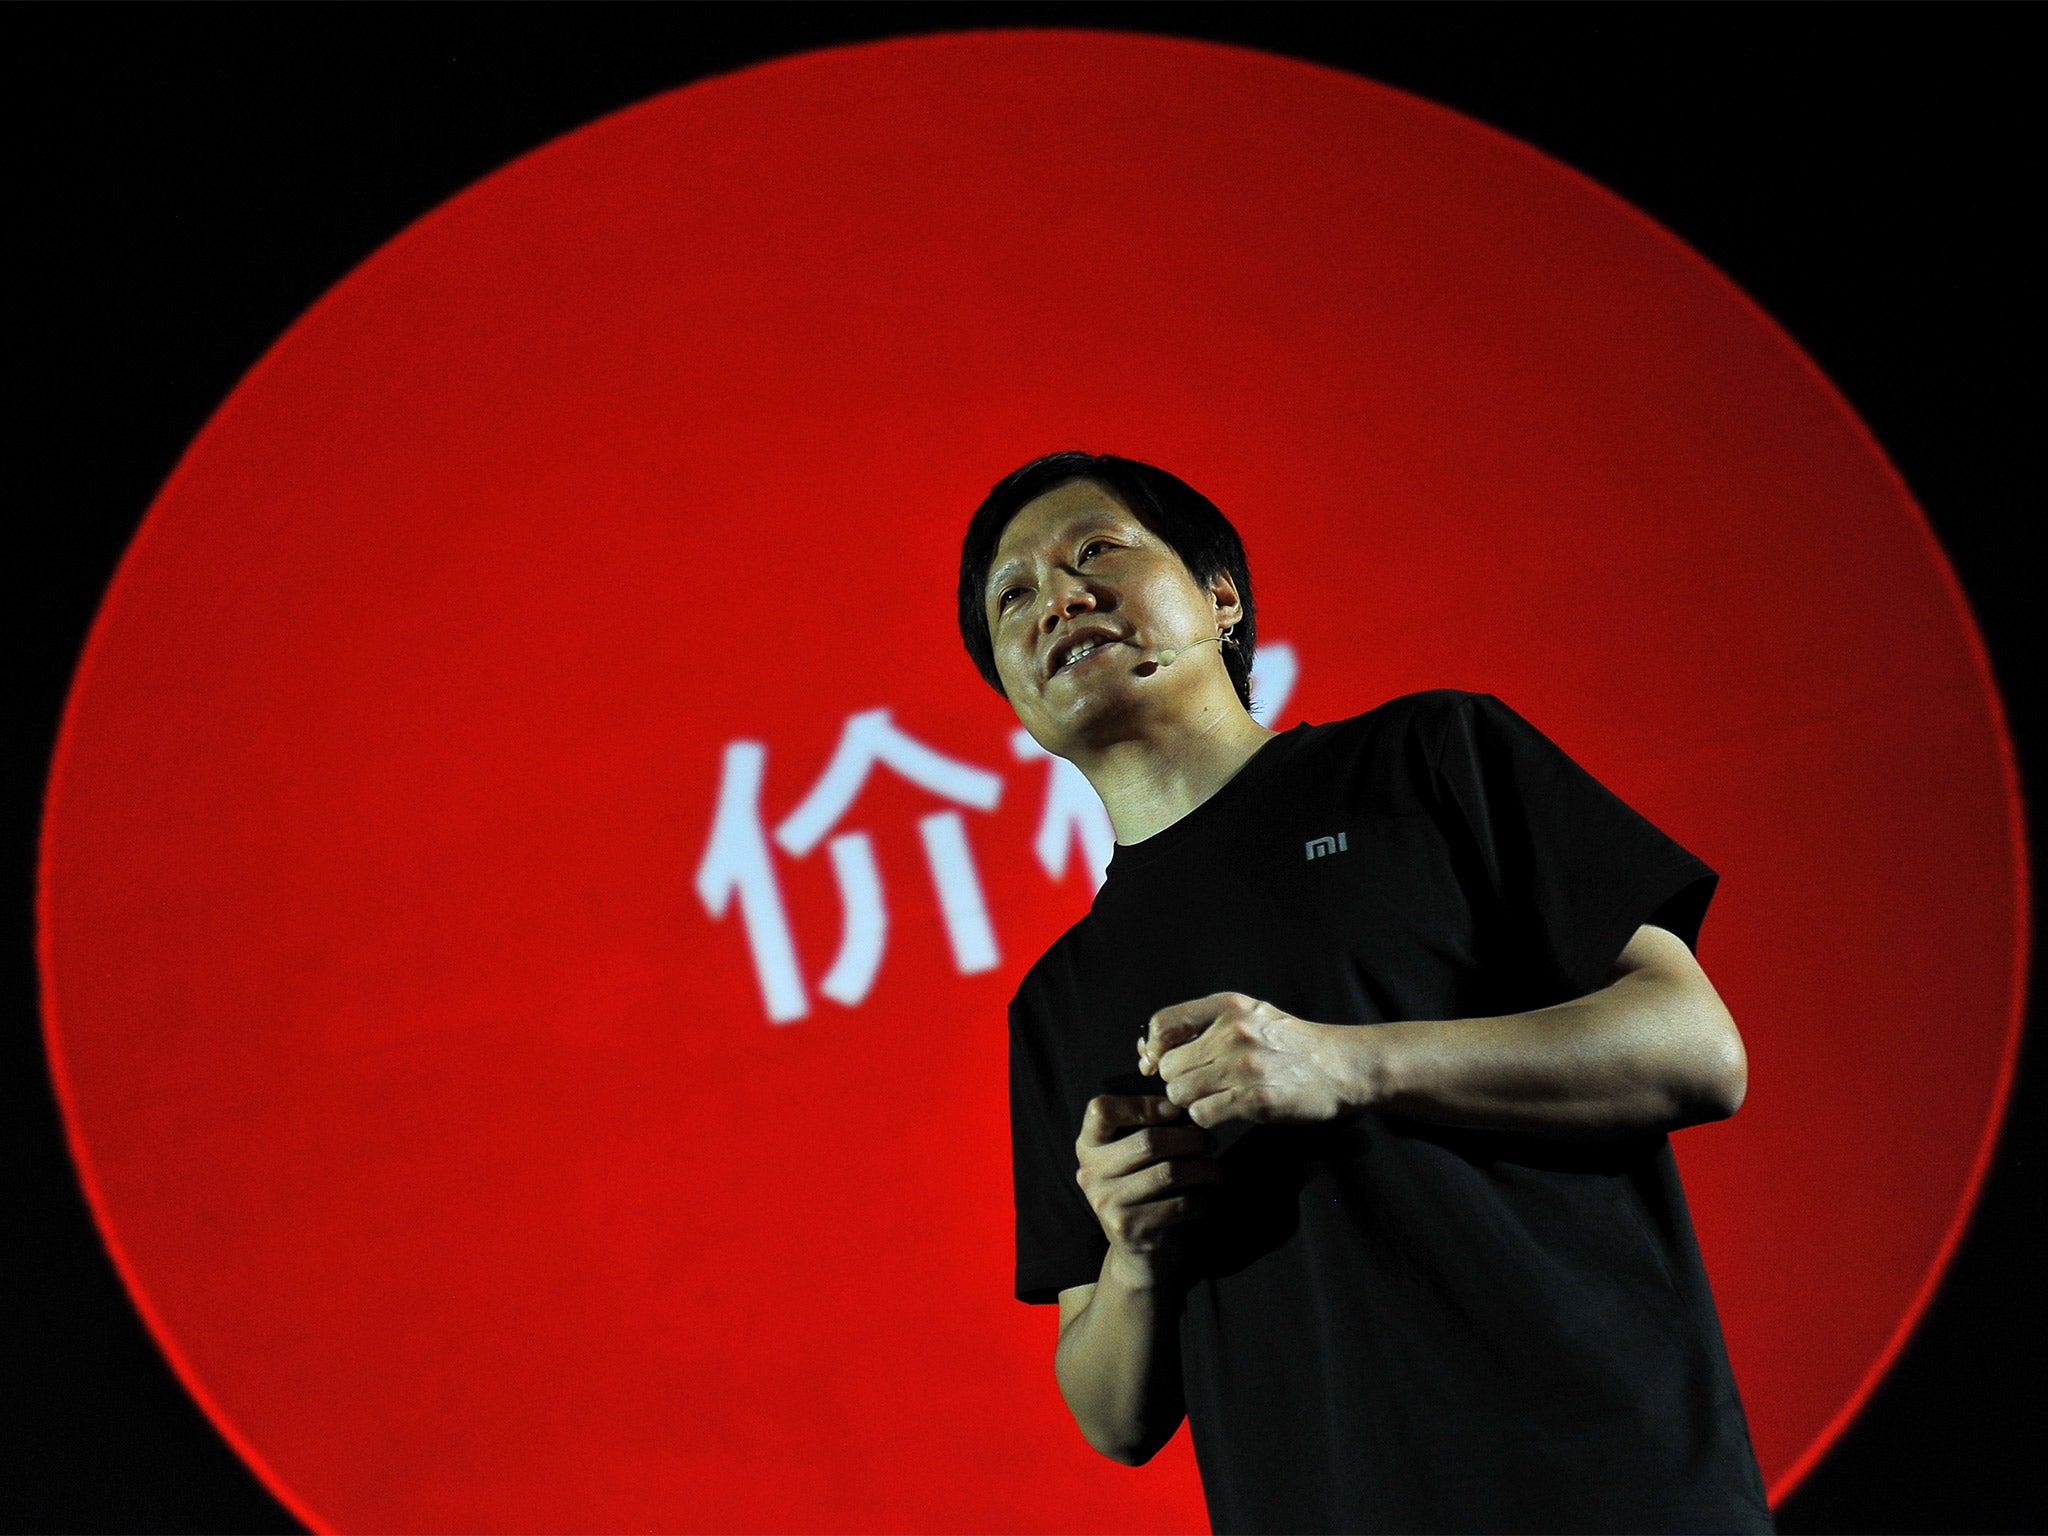 Lei Jun is keen to distance himself from comparisons to the late Apple boss Steve Jobs